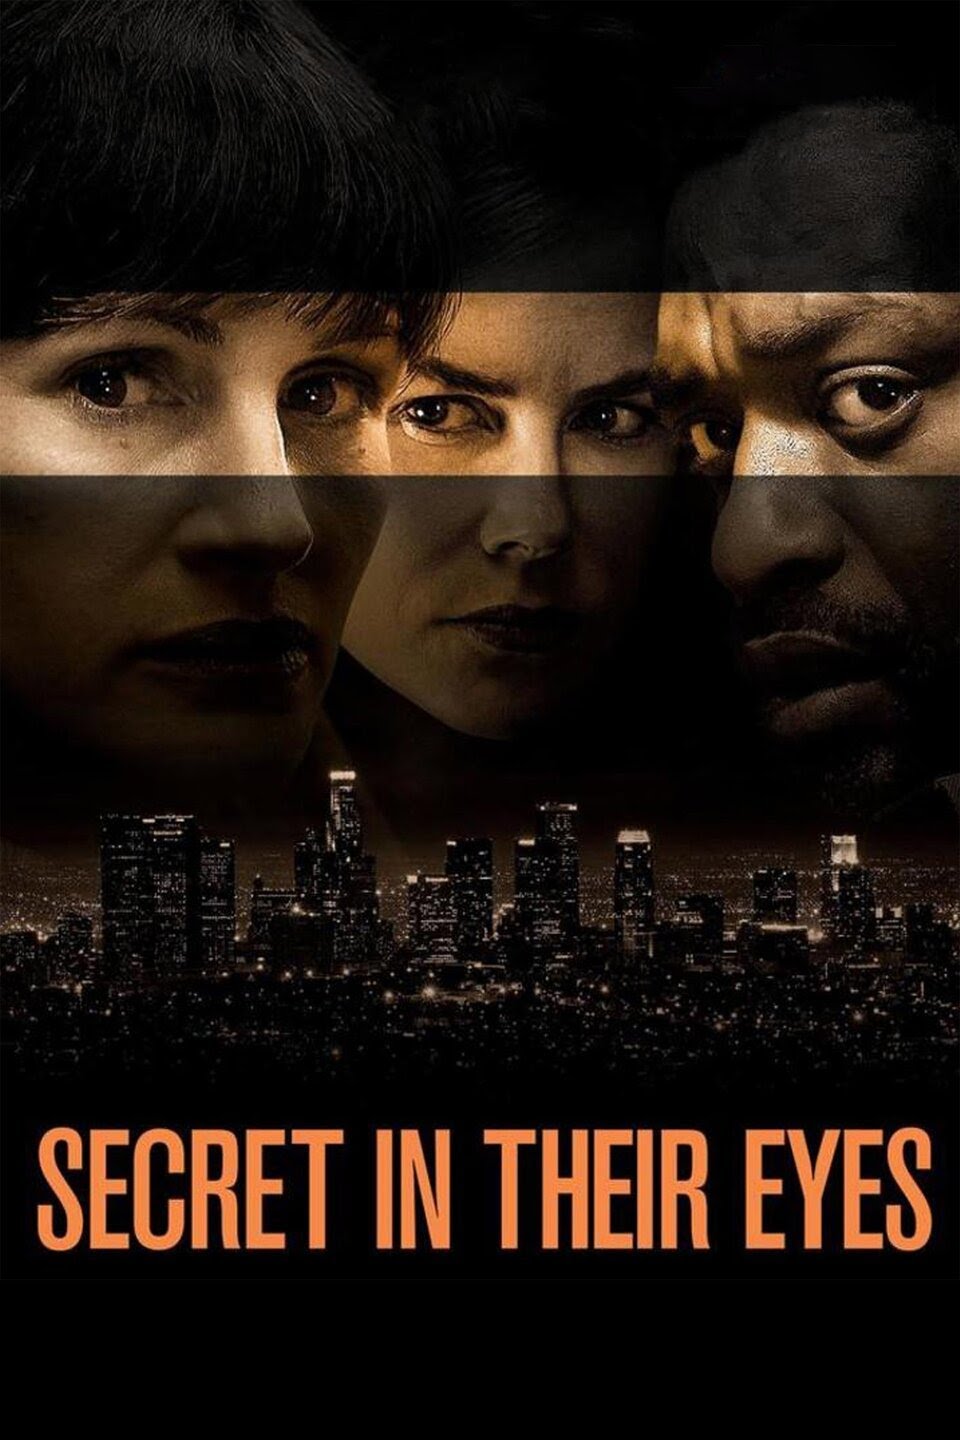 Secret In Their Eyes (2015) Vudu or Movies Anywhere HD redemption only